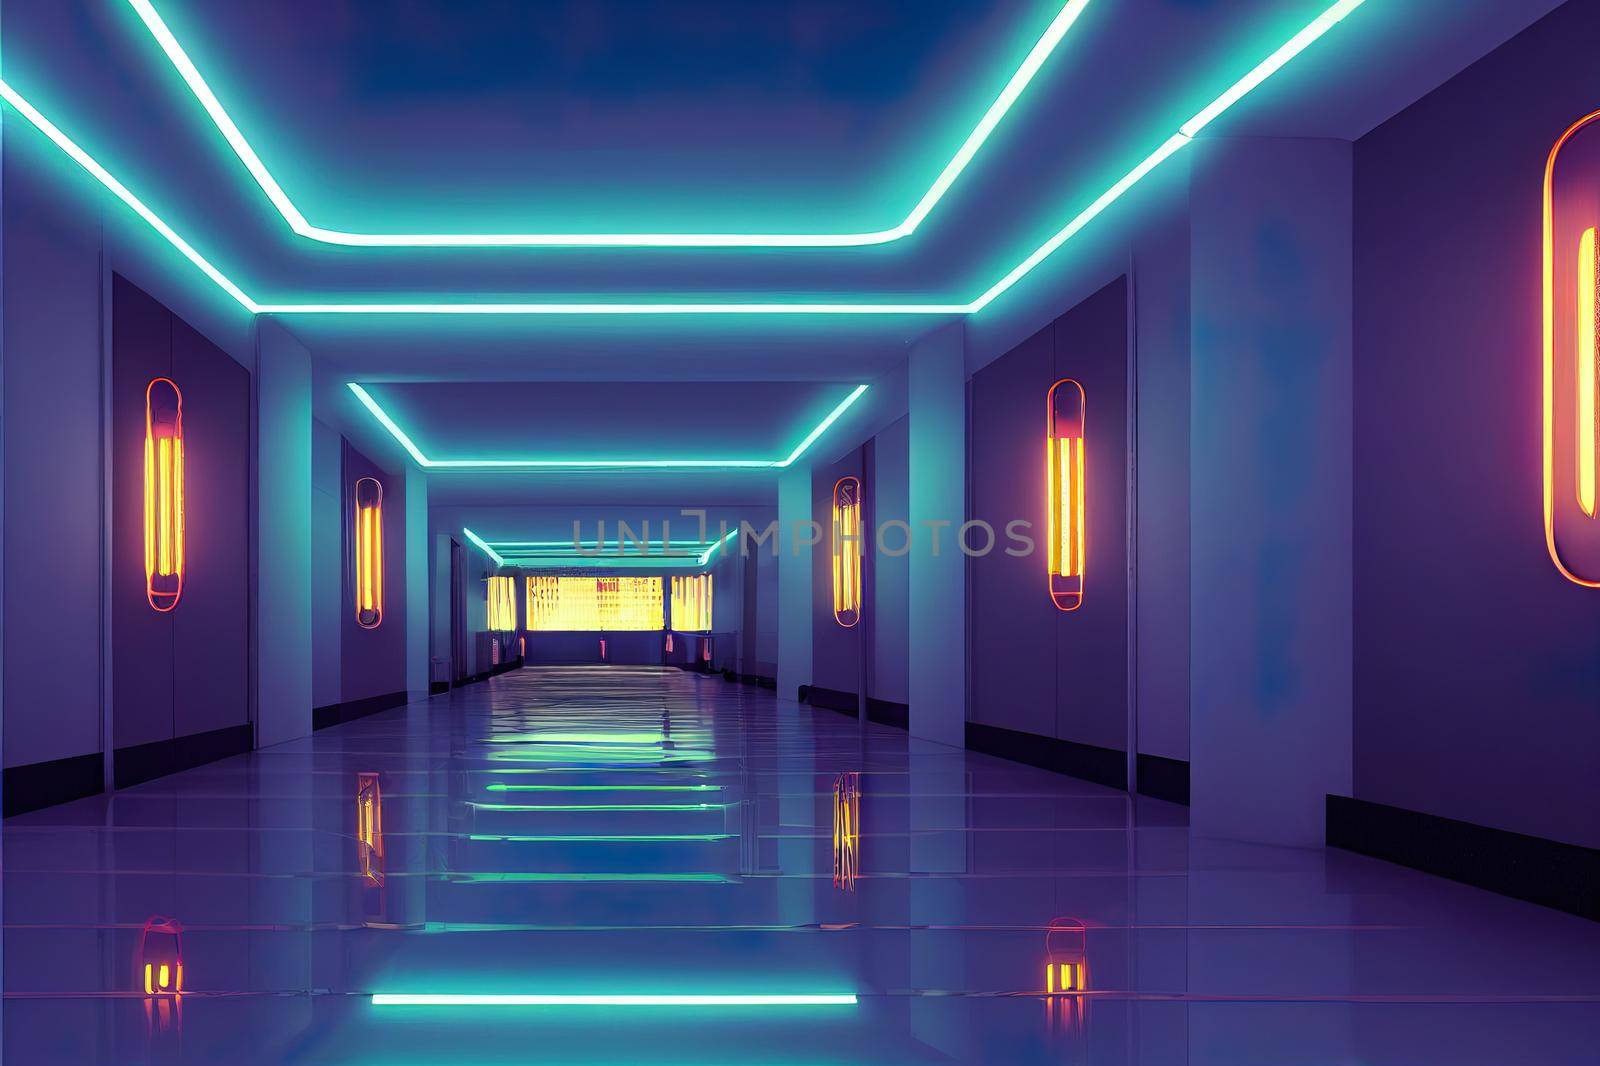 Sci Fy neon glowing lamps in a dark corridor. Reflections on the floor and walls. Empty background in the center. 3d rendering image. Techology futuristic background.